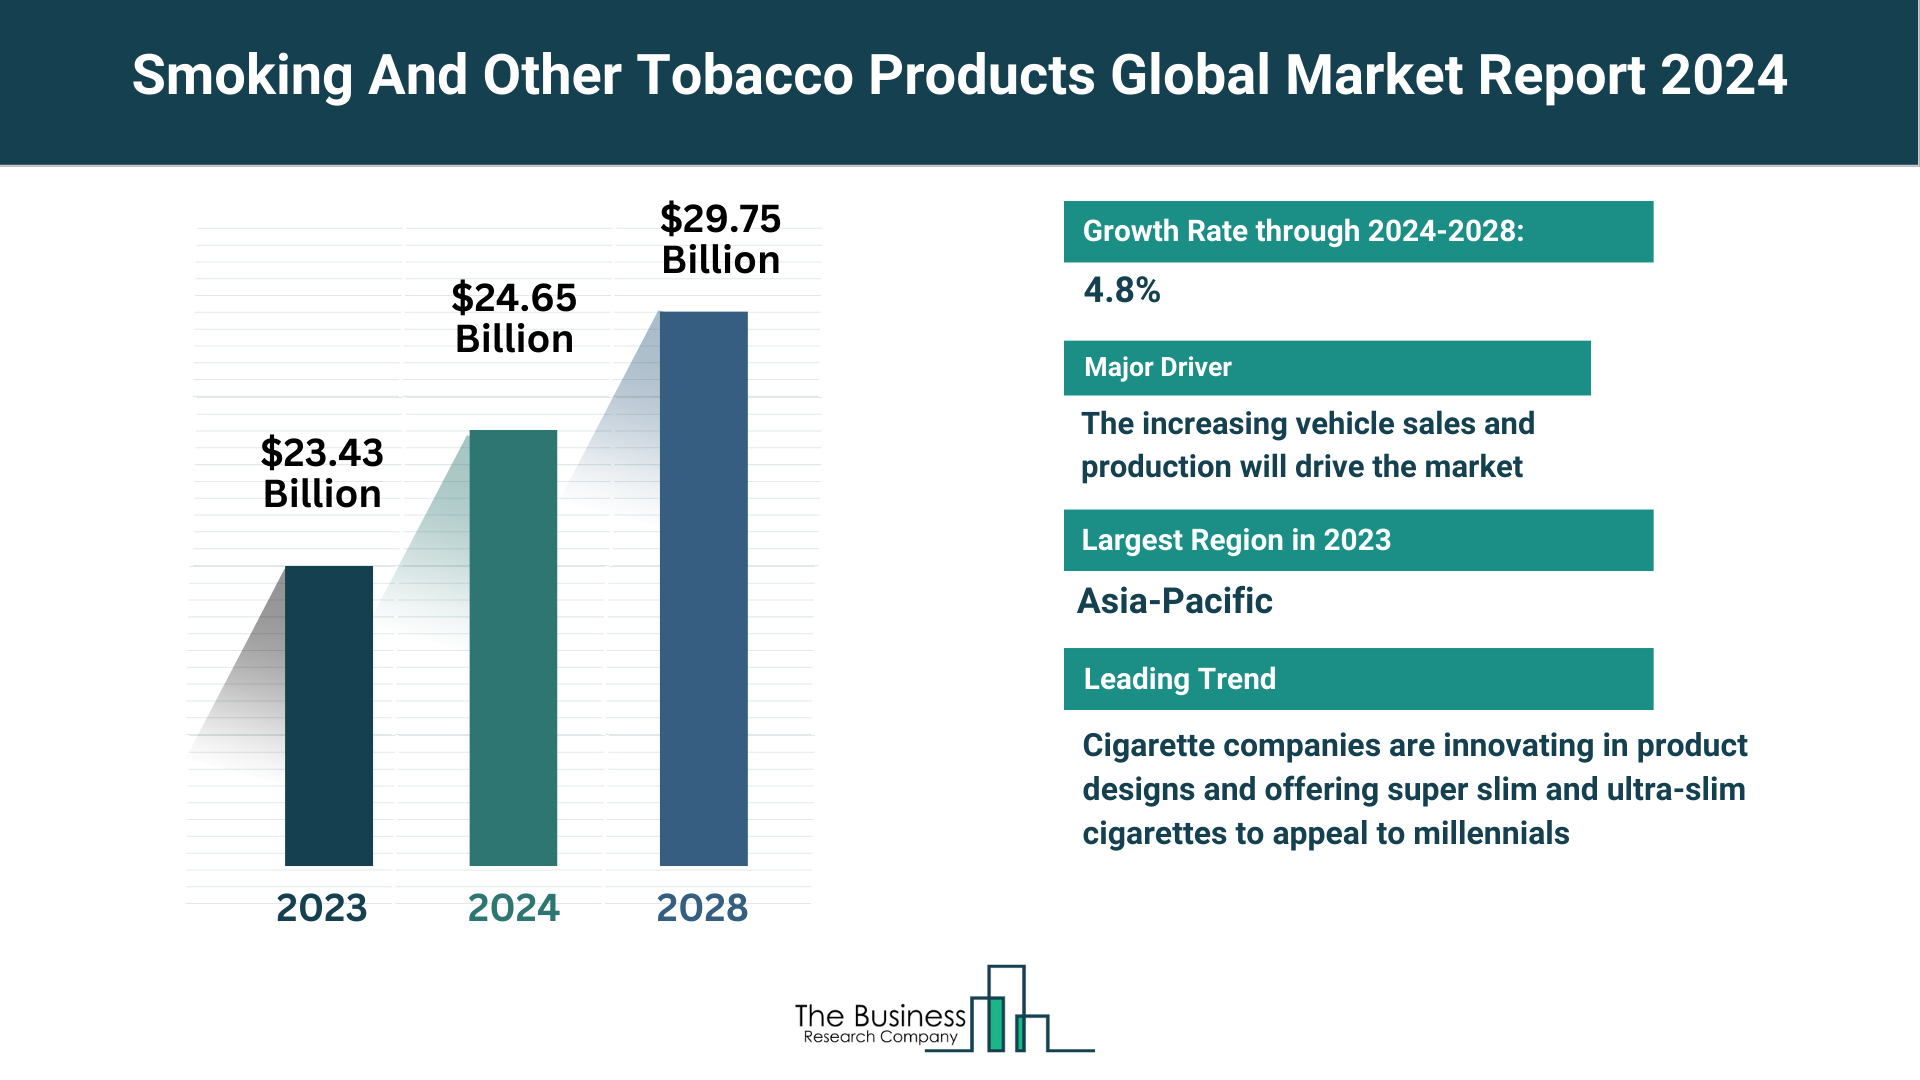 Global Smoking And Other Tobacco Products Market